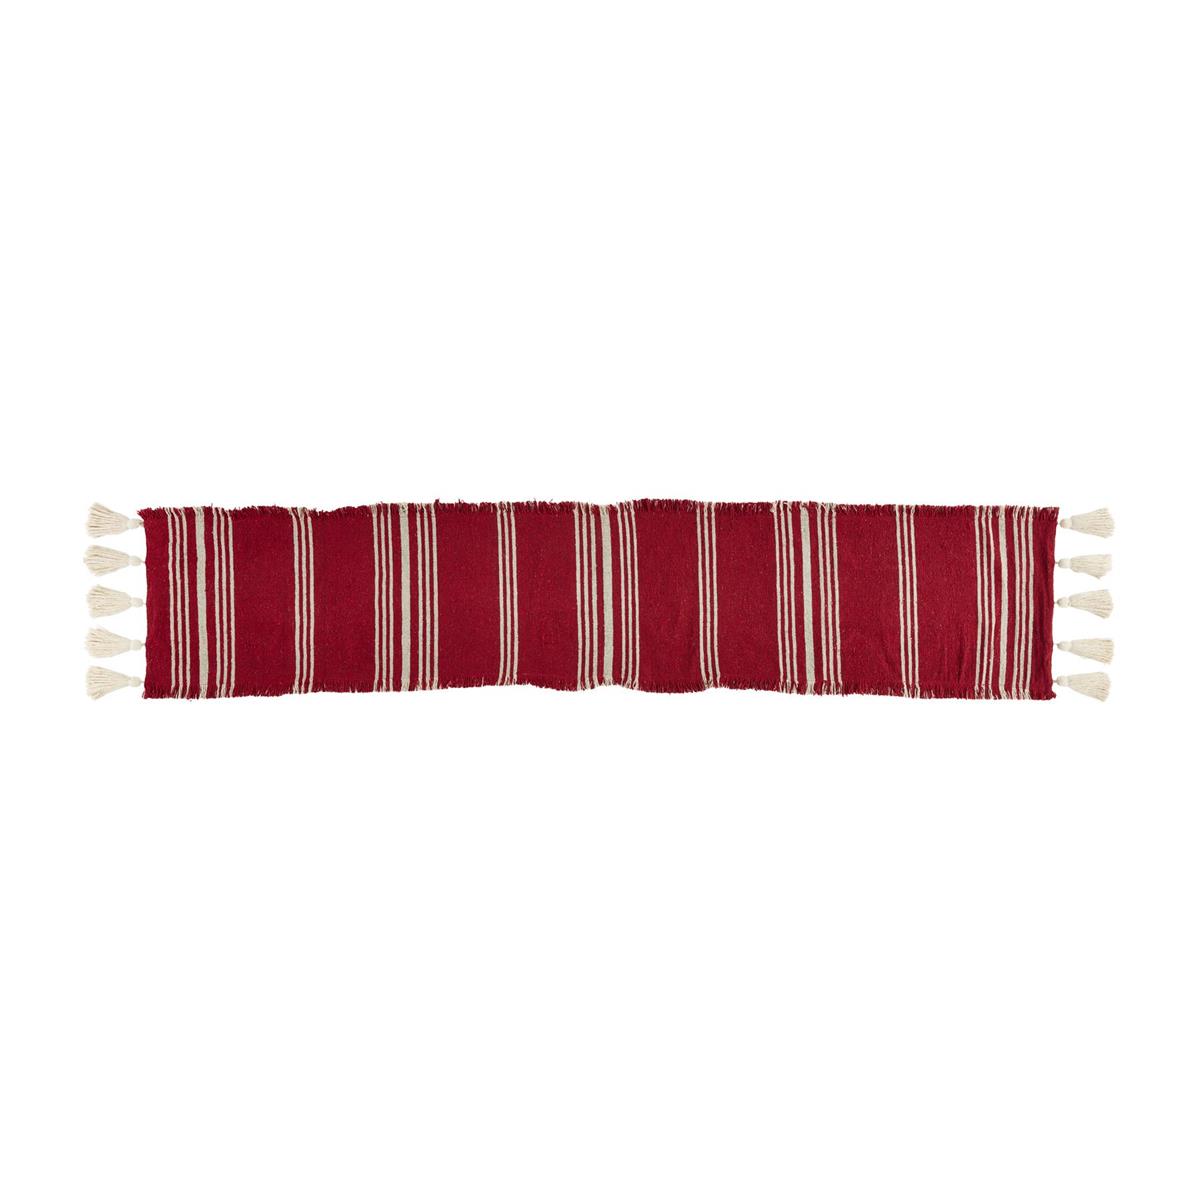 red and cream striped runner with cream tassels on the ends.